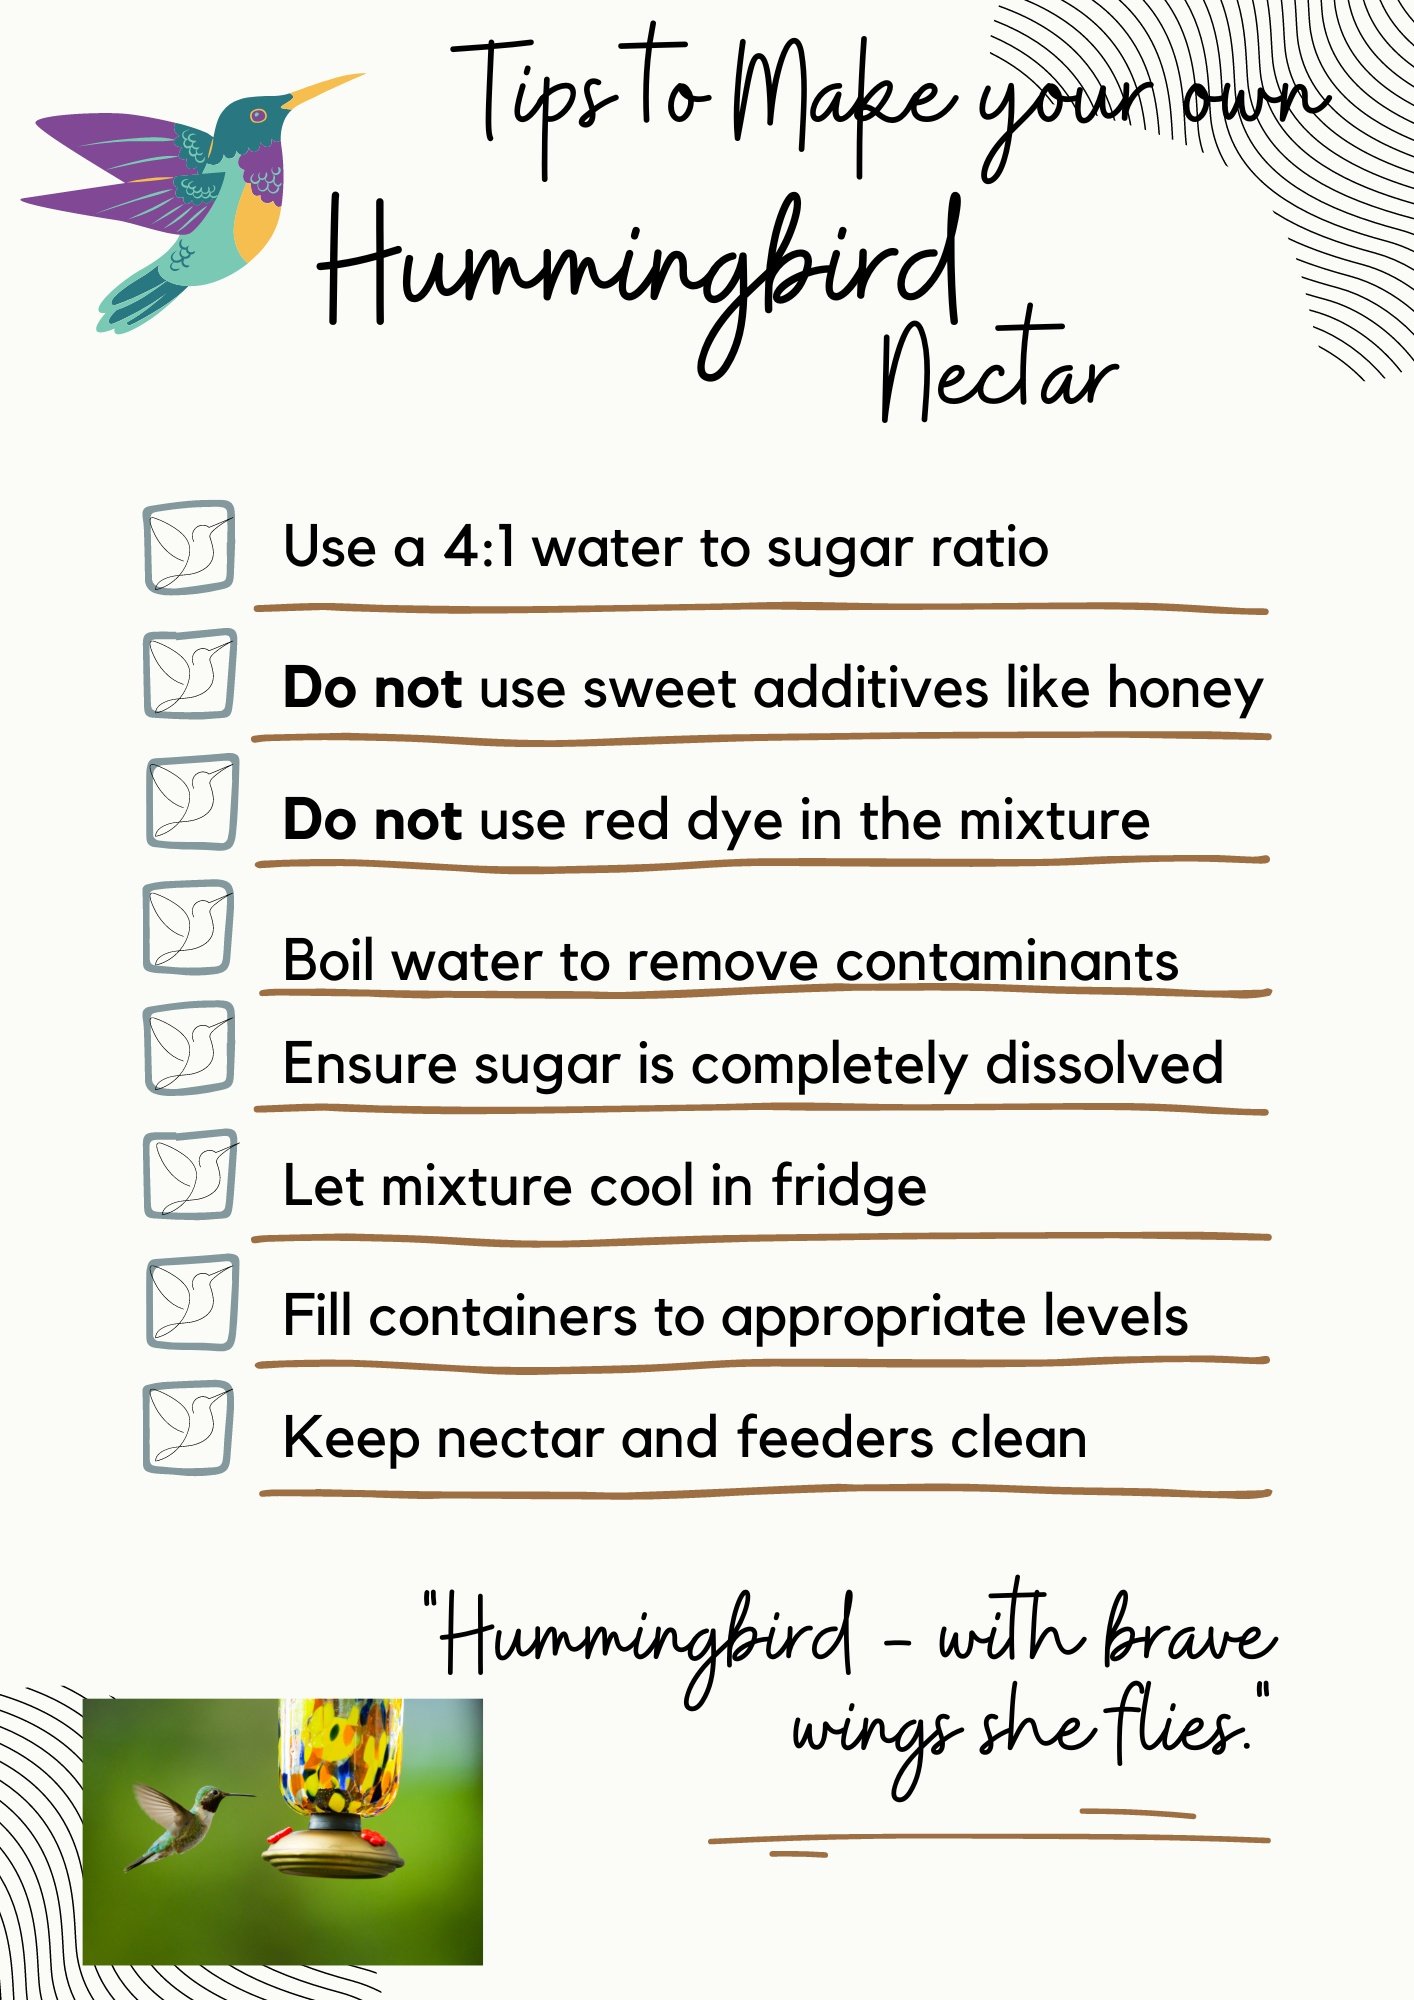 Tips on making your own Hummingbird nectar